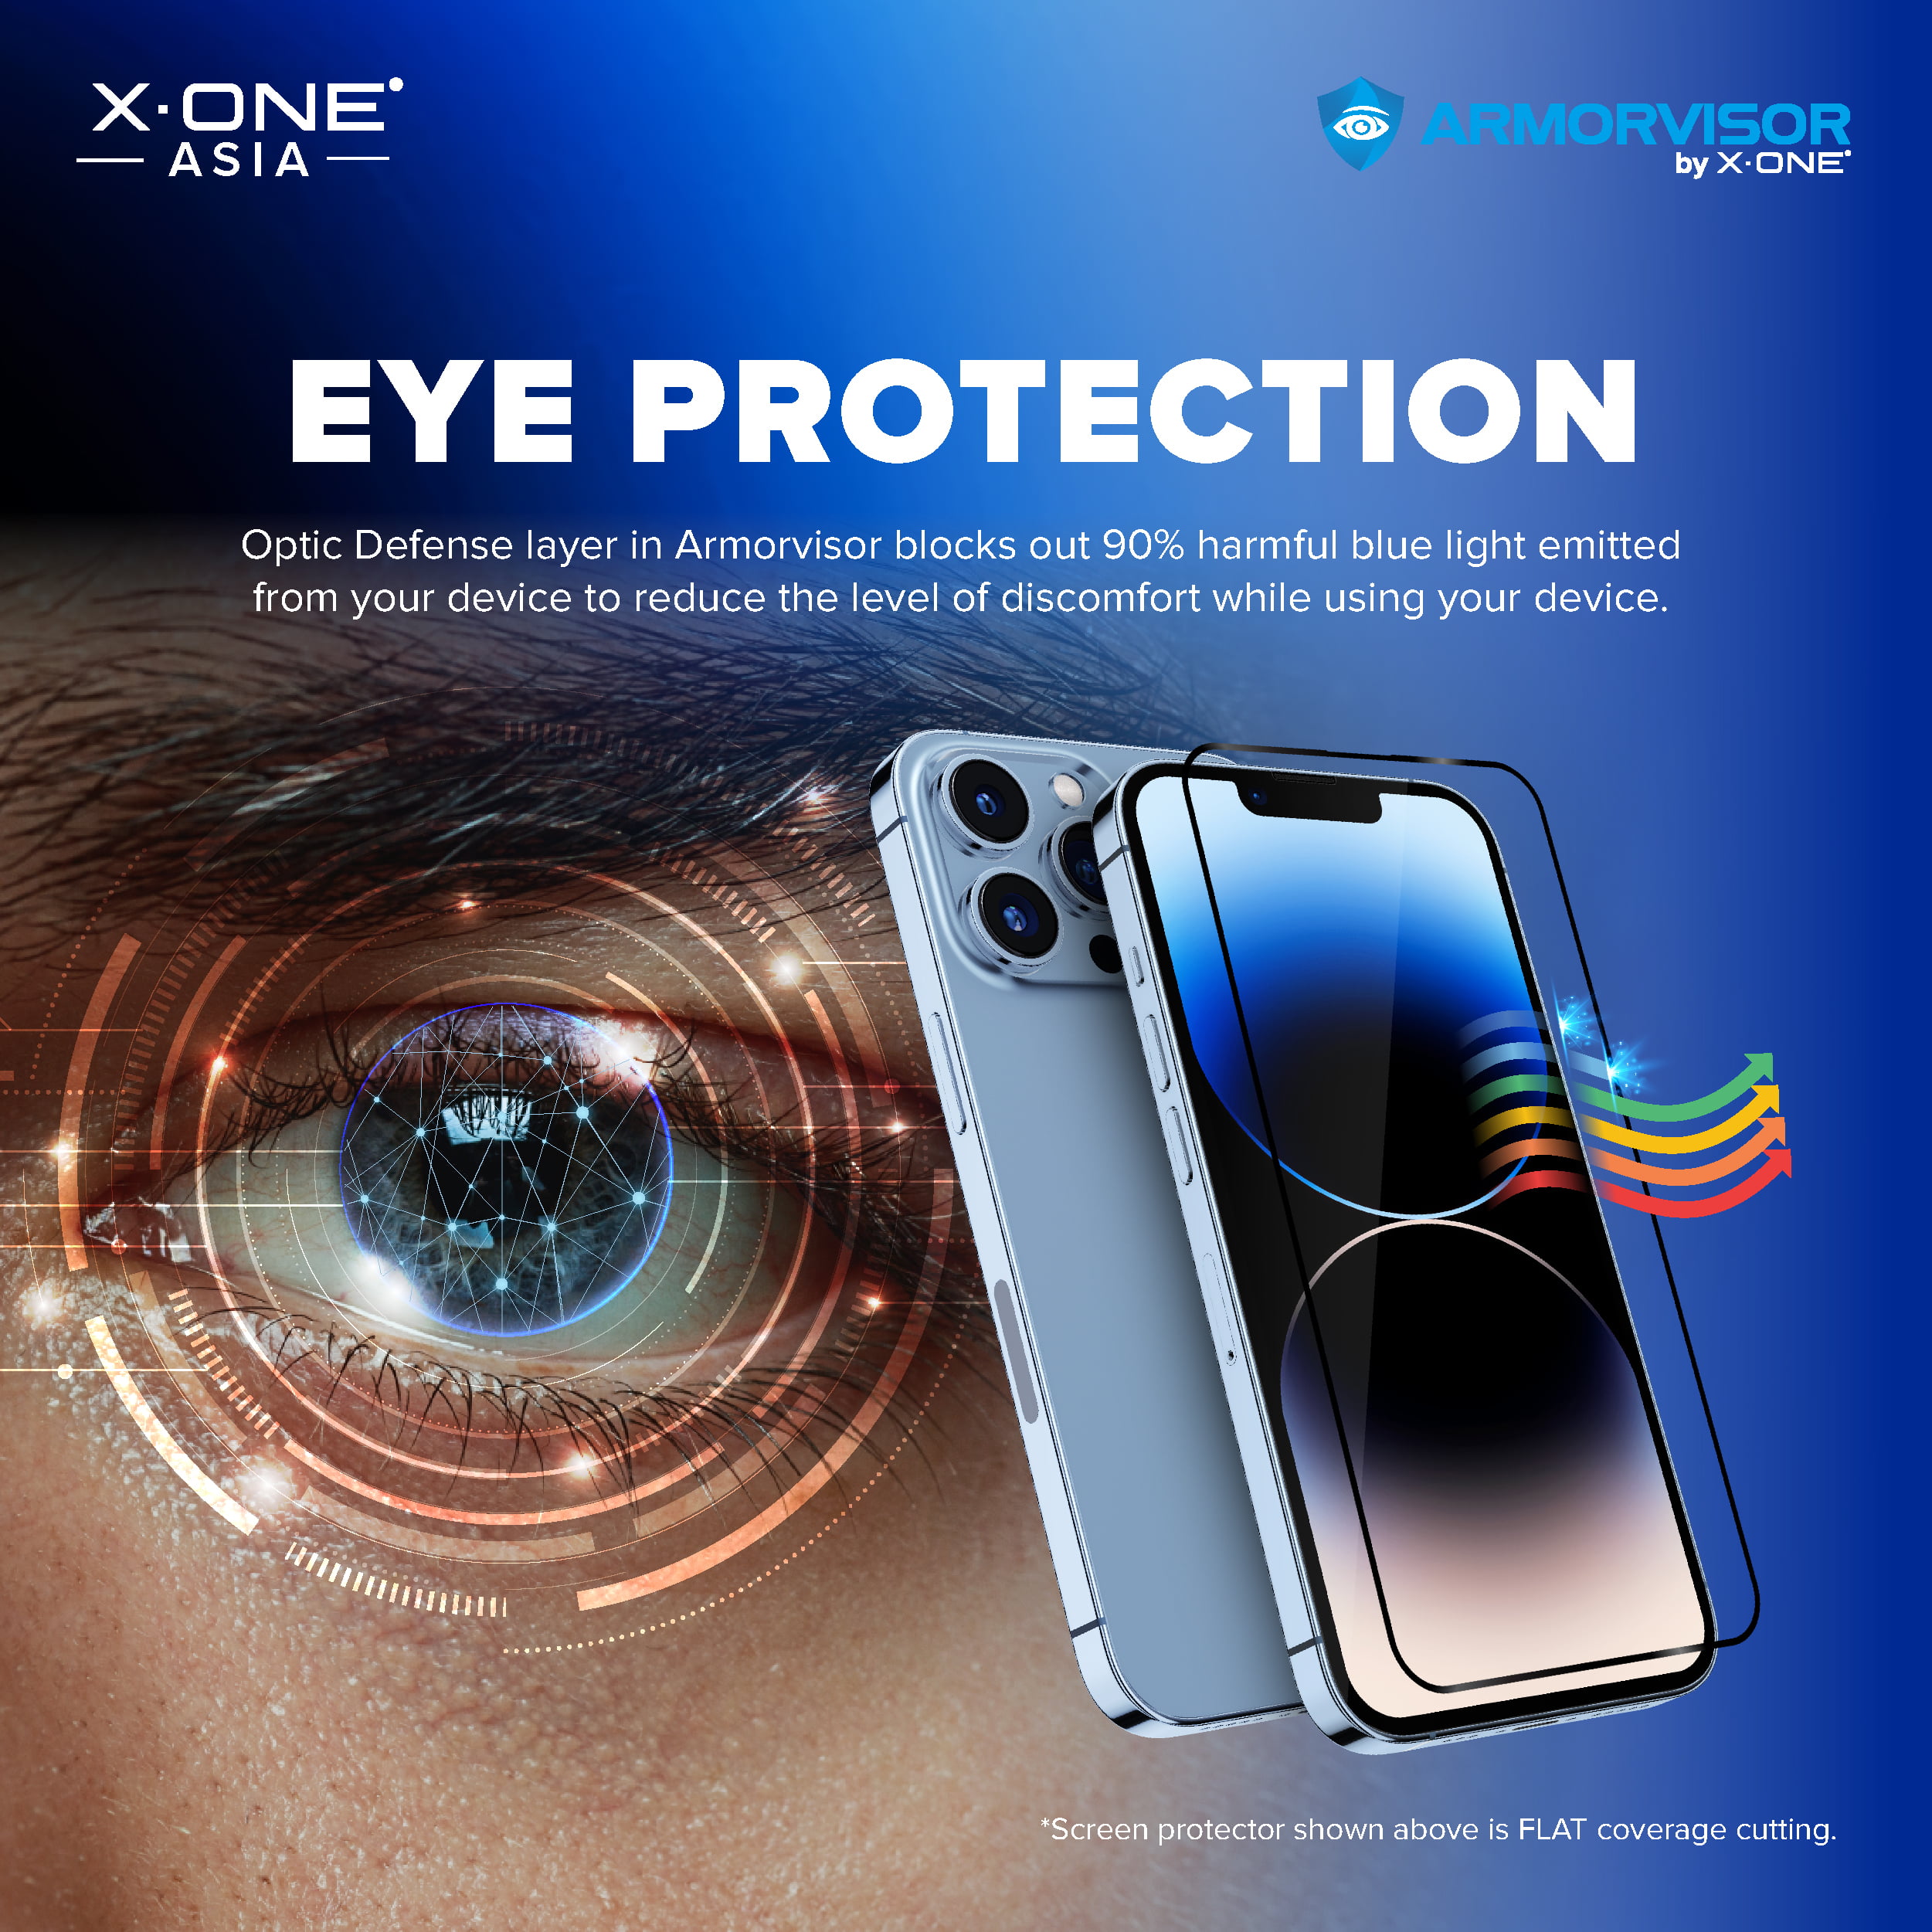 Feature Graphic For Armorvisor 4TH Gen v2 Eye Protection